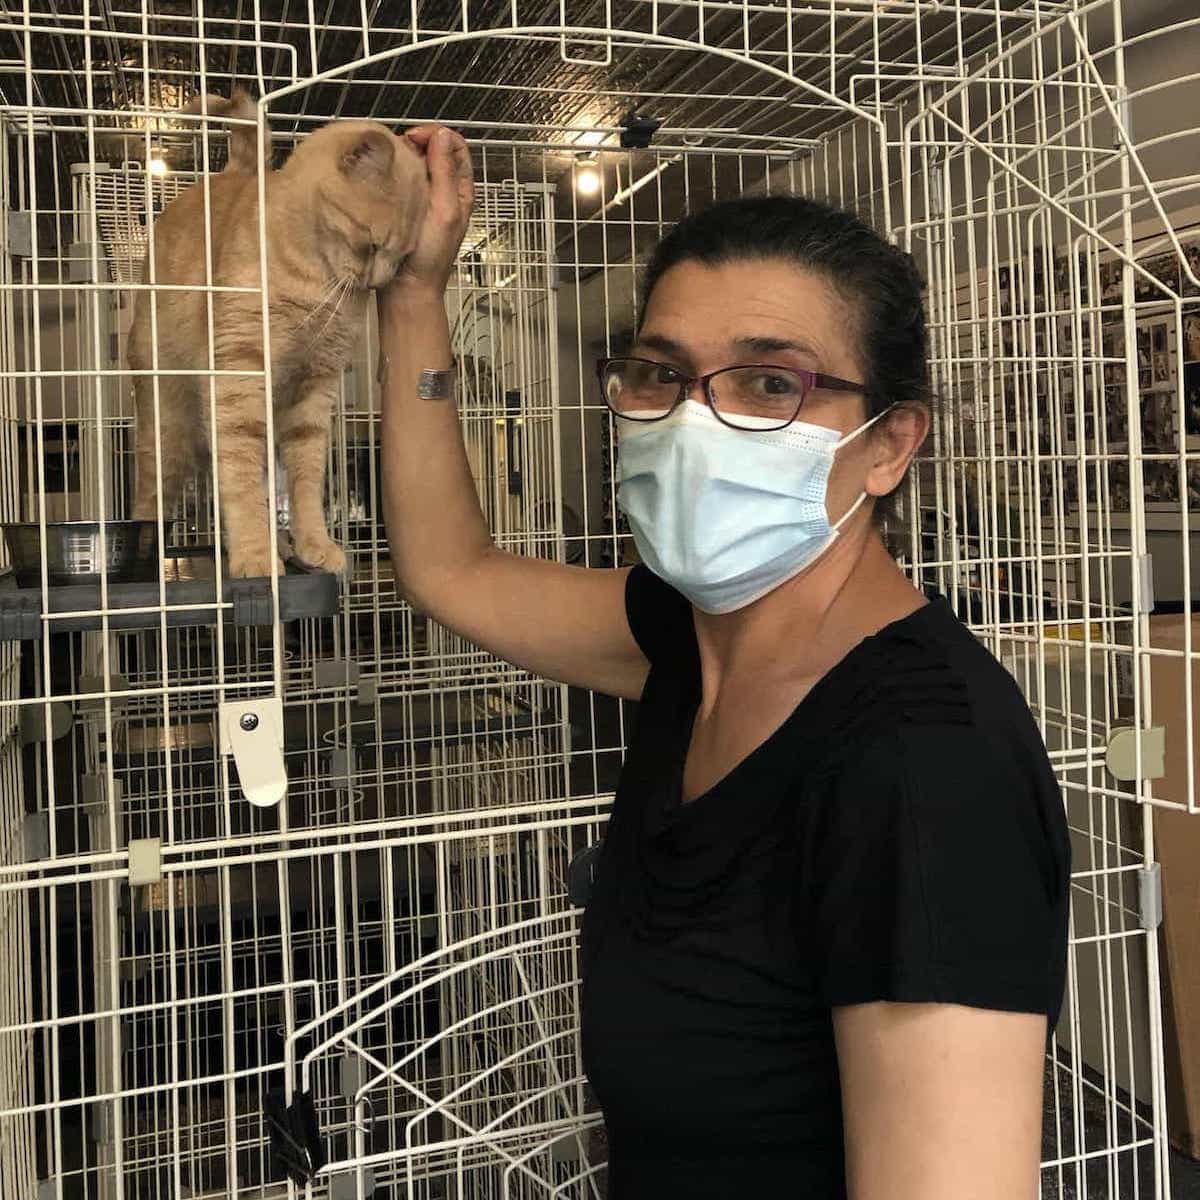 Woman standing next to a large cage wearing mask petting a cat